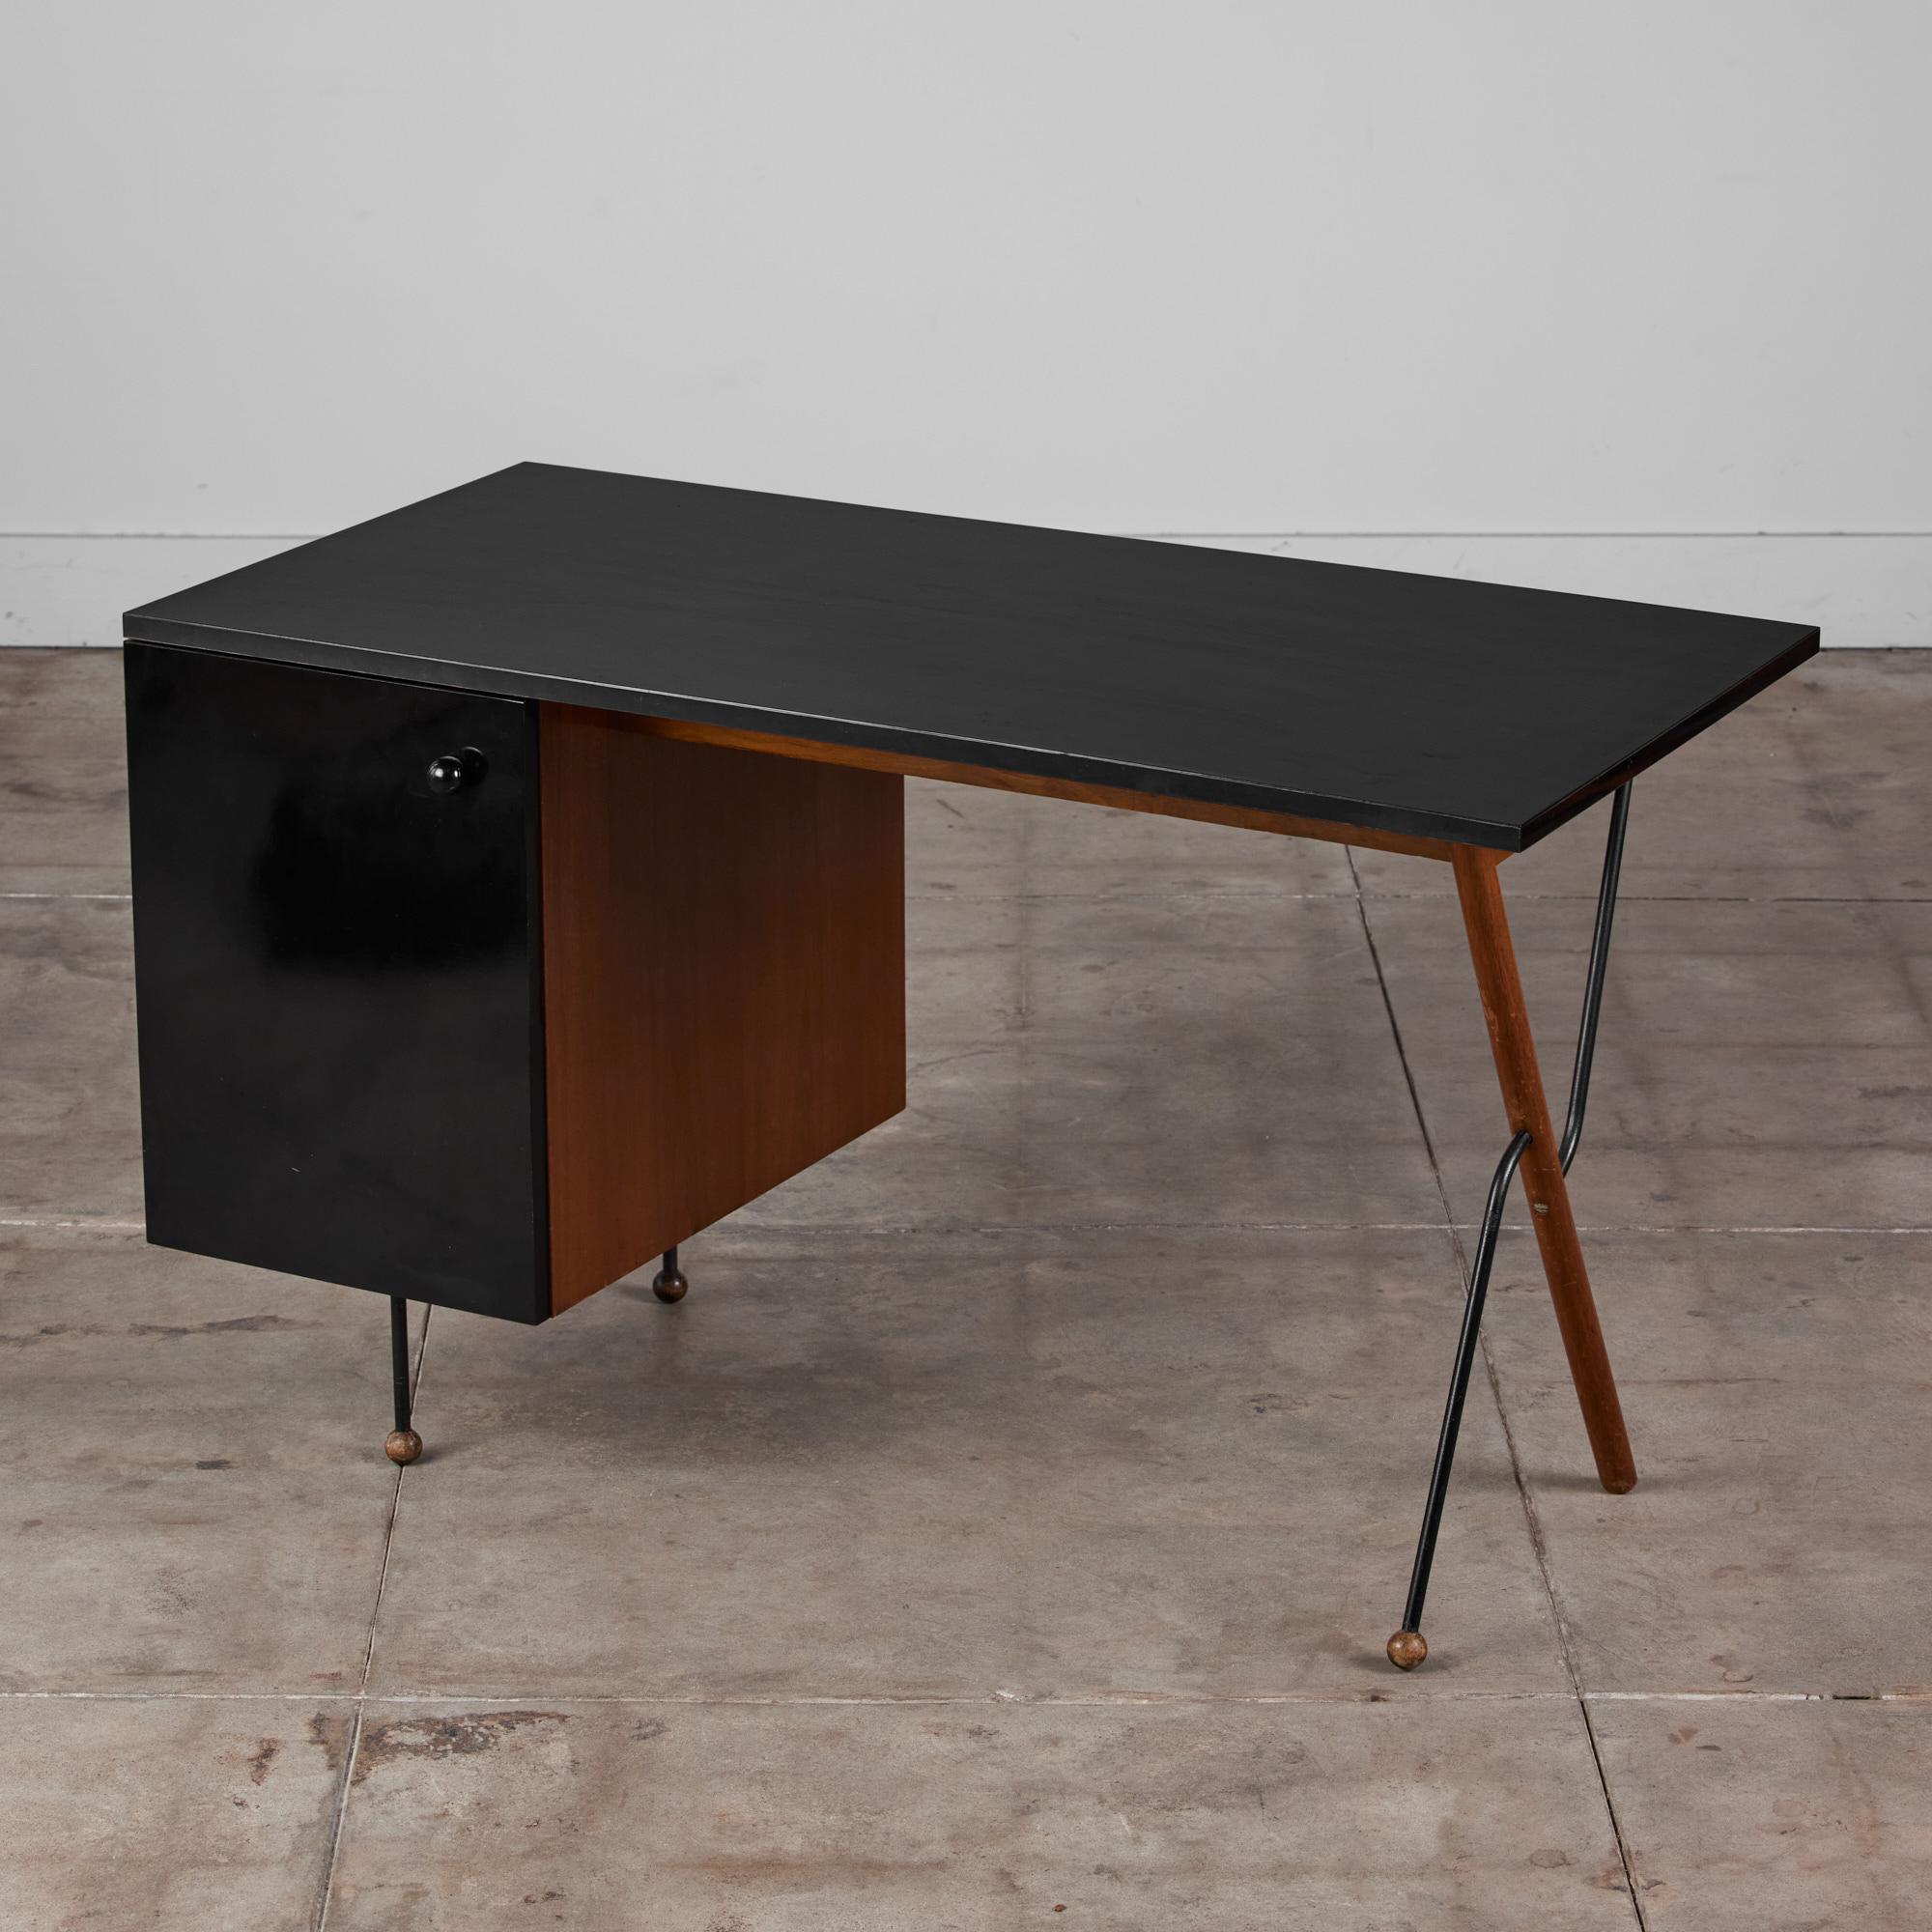 Greta Magnusson-Grossman desk for Glenn of California, c.1950s, USA. This stunning desk features a mixed base of walnut and iron with a black laminated writing surface and cabinet door front. The legs consist of solid black iron and spherical wood